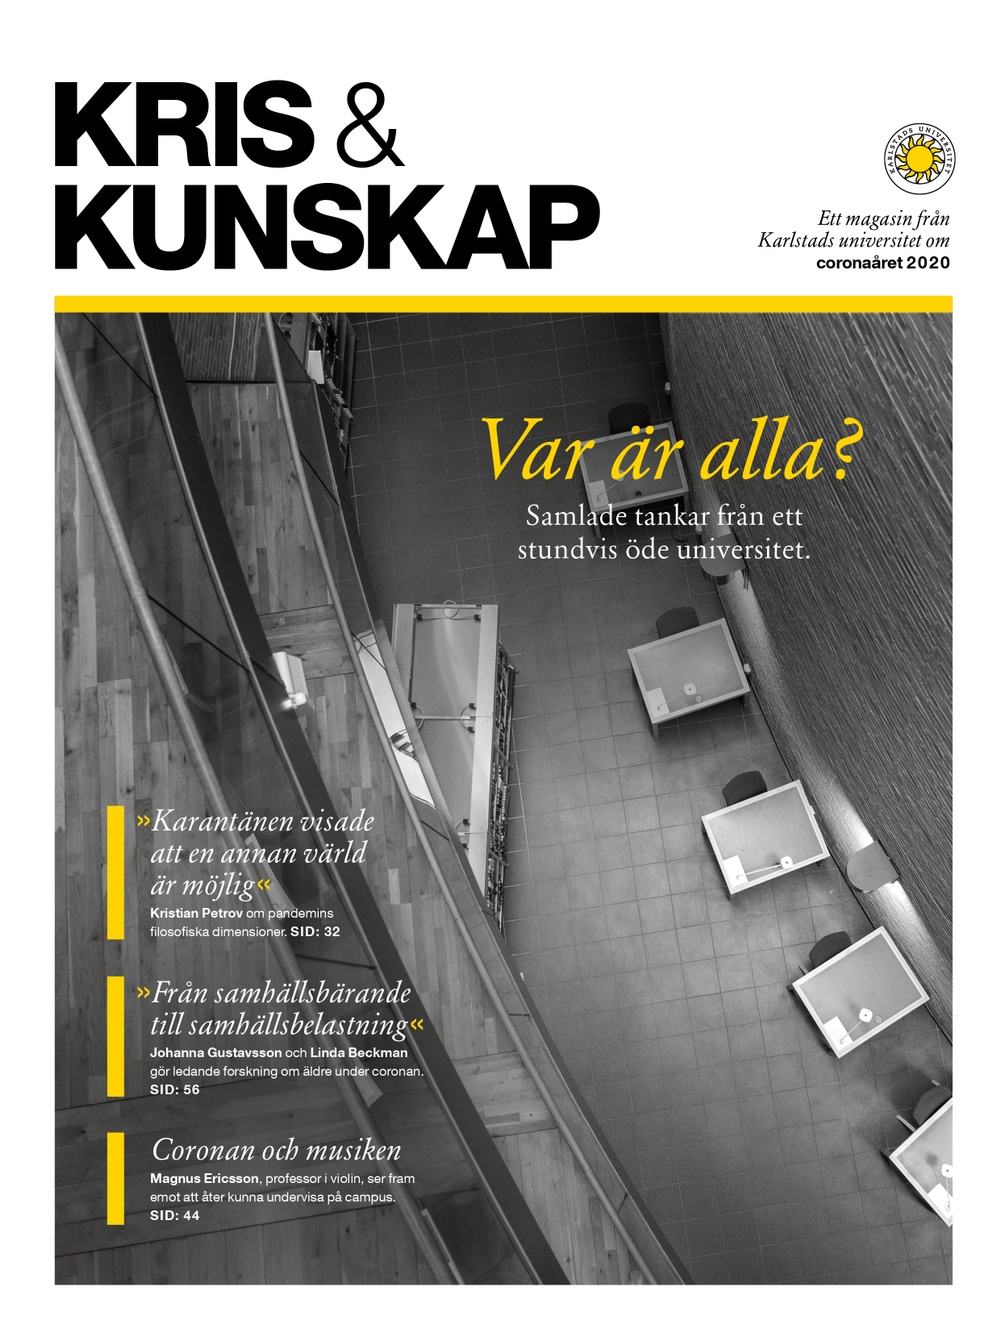 Picture of empty seats from above and text Kris och kunskap